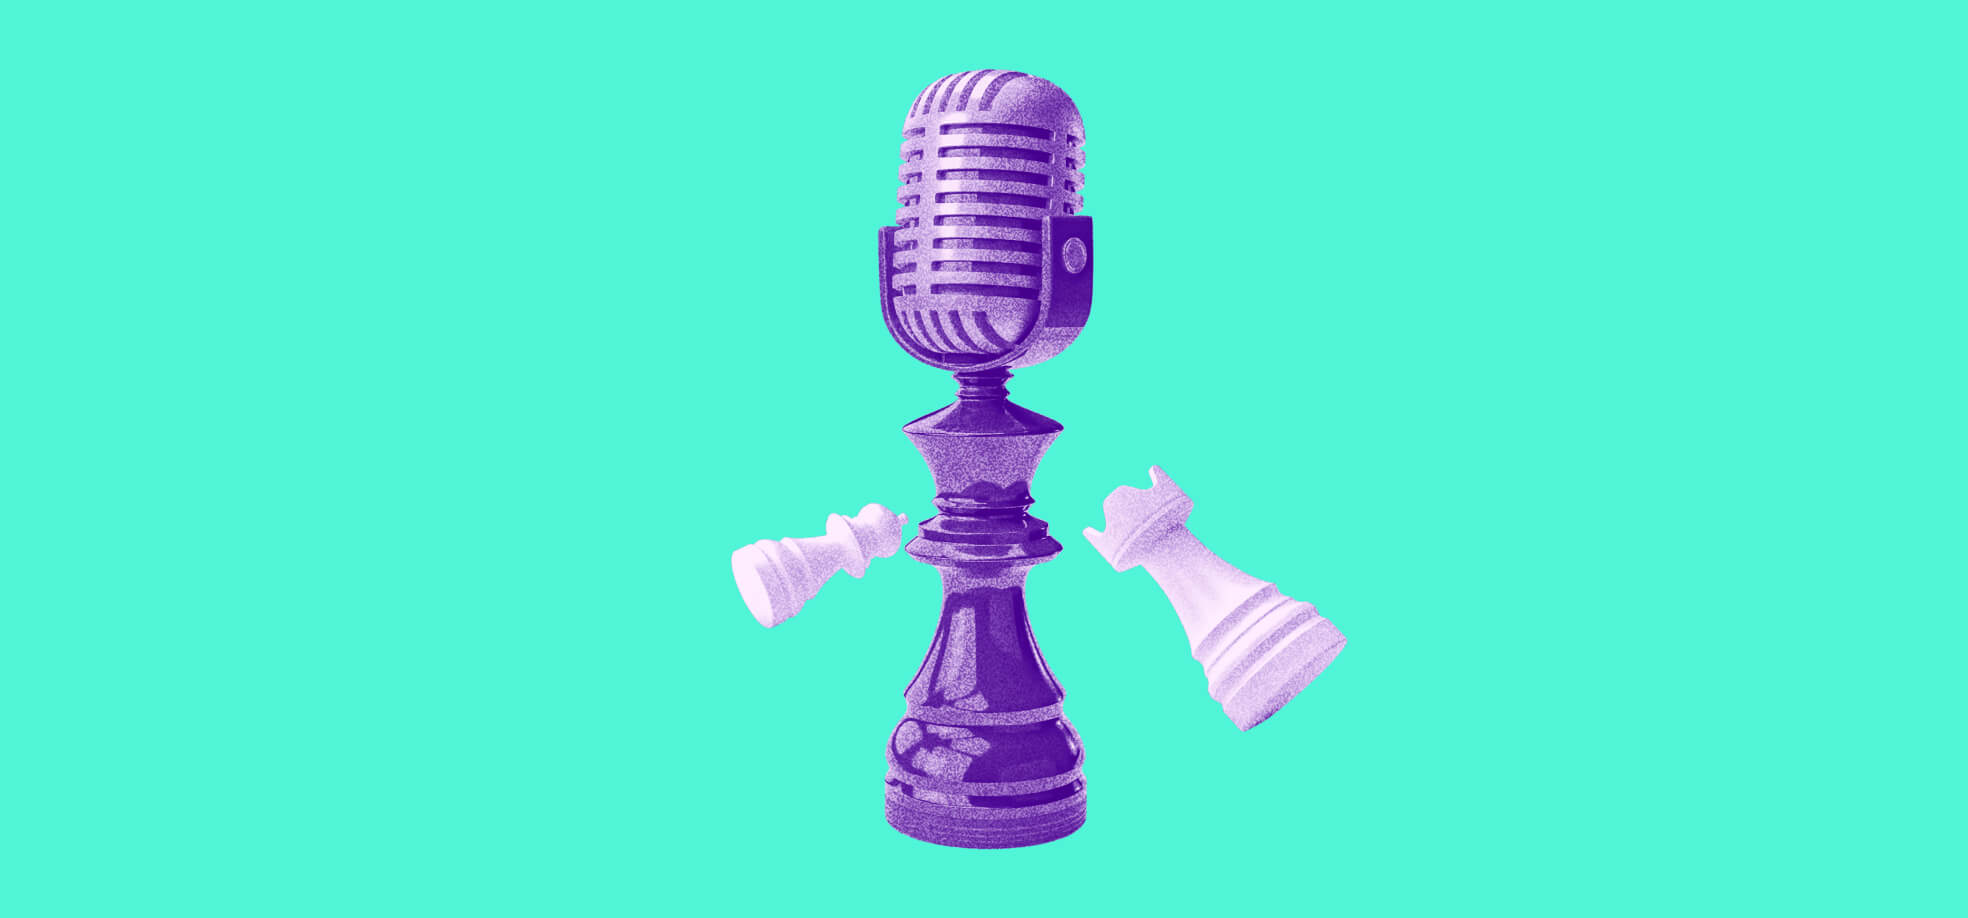 a microphone on a chase figure illustration